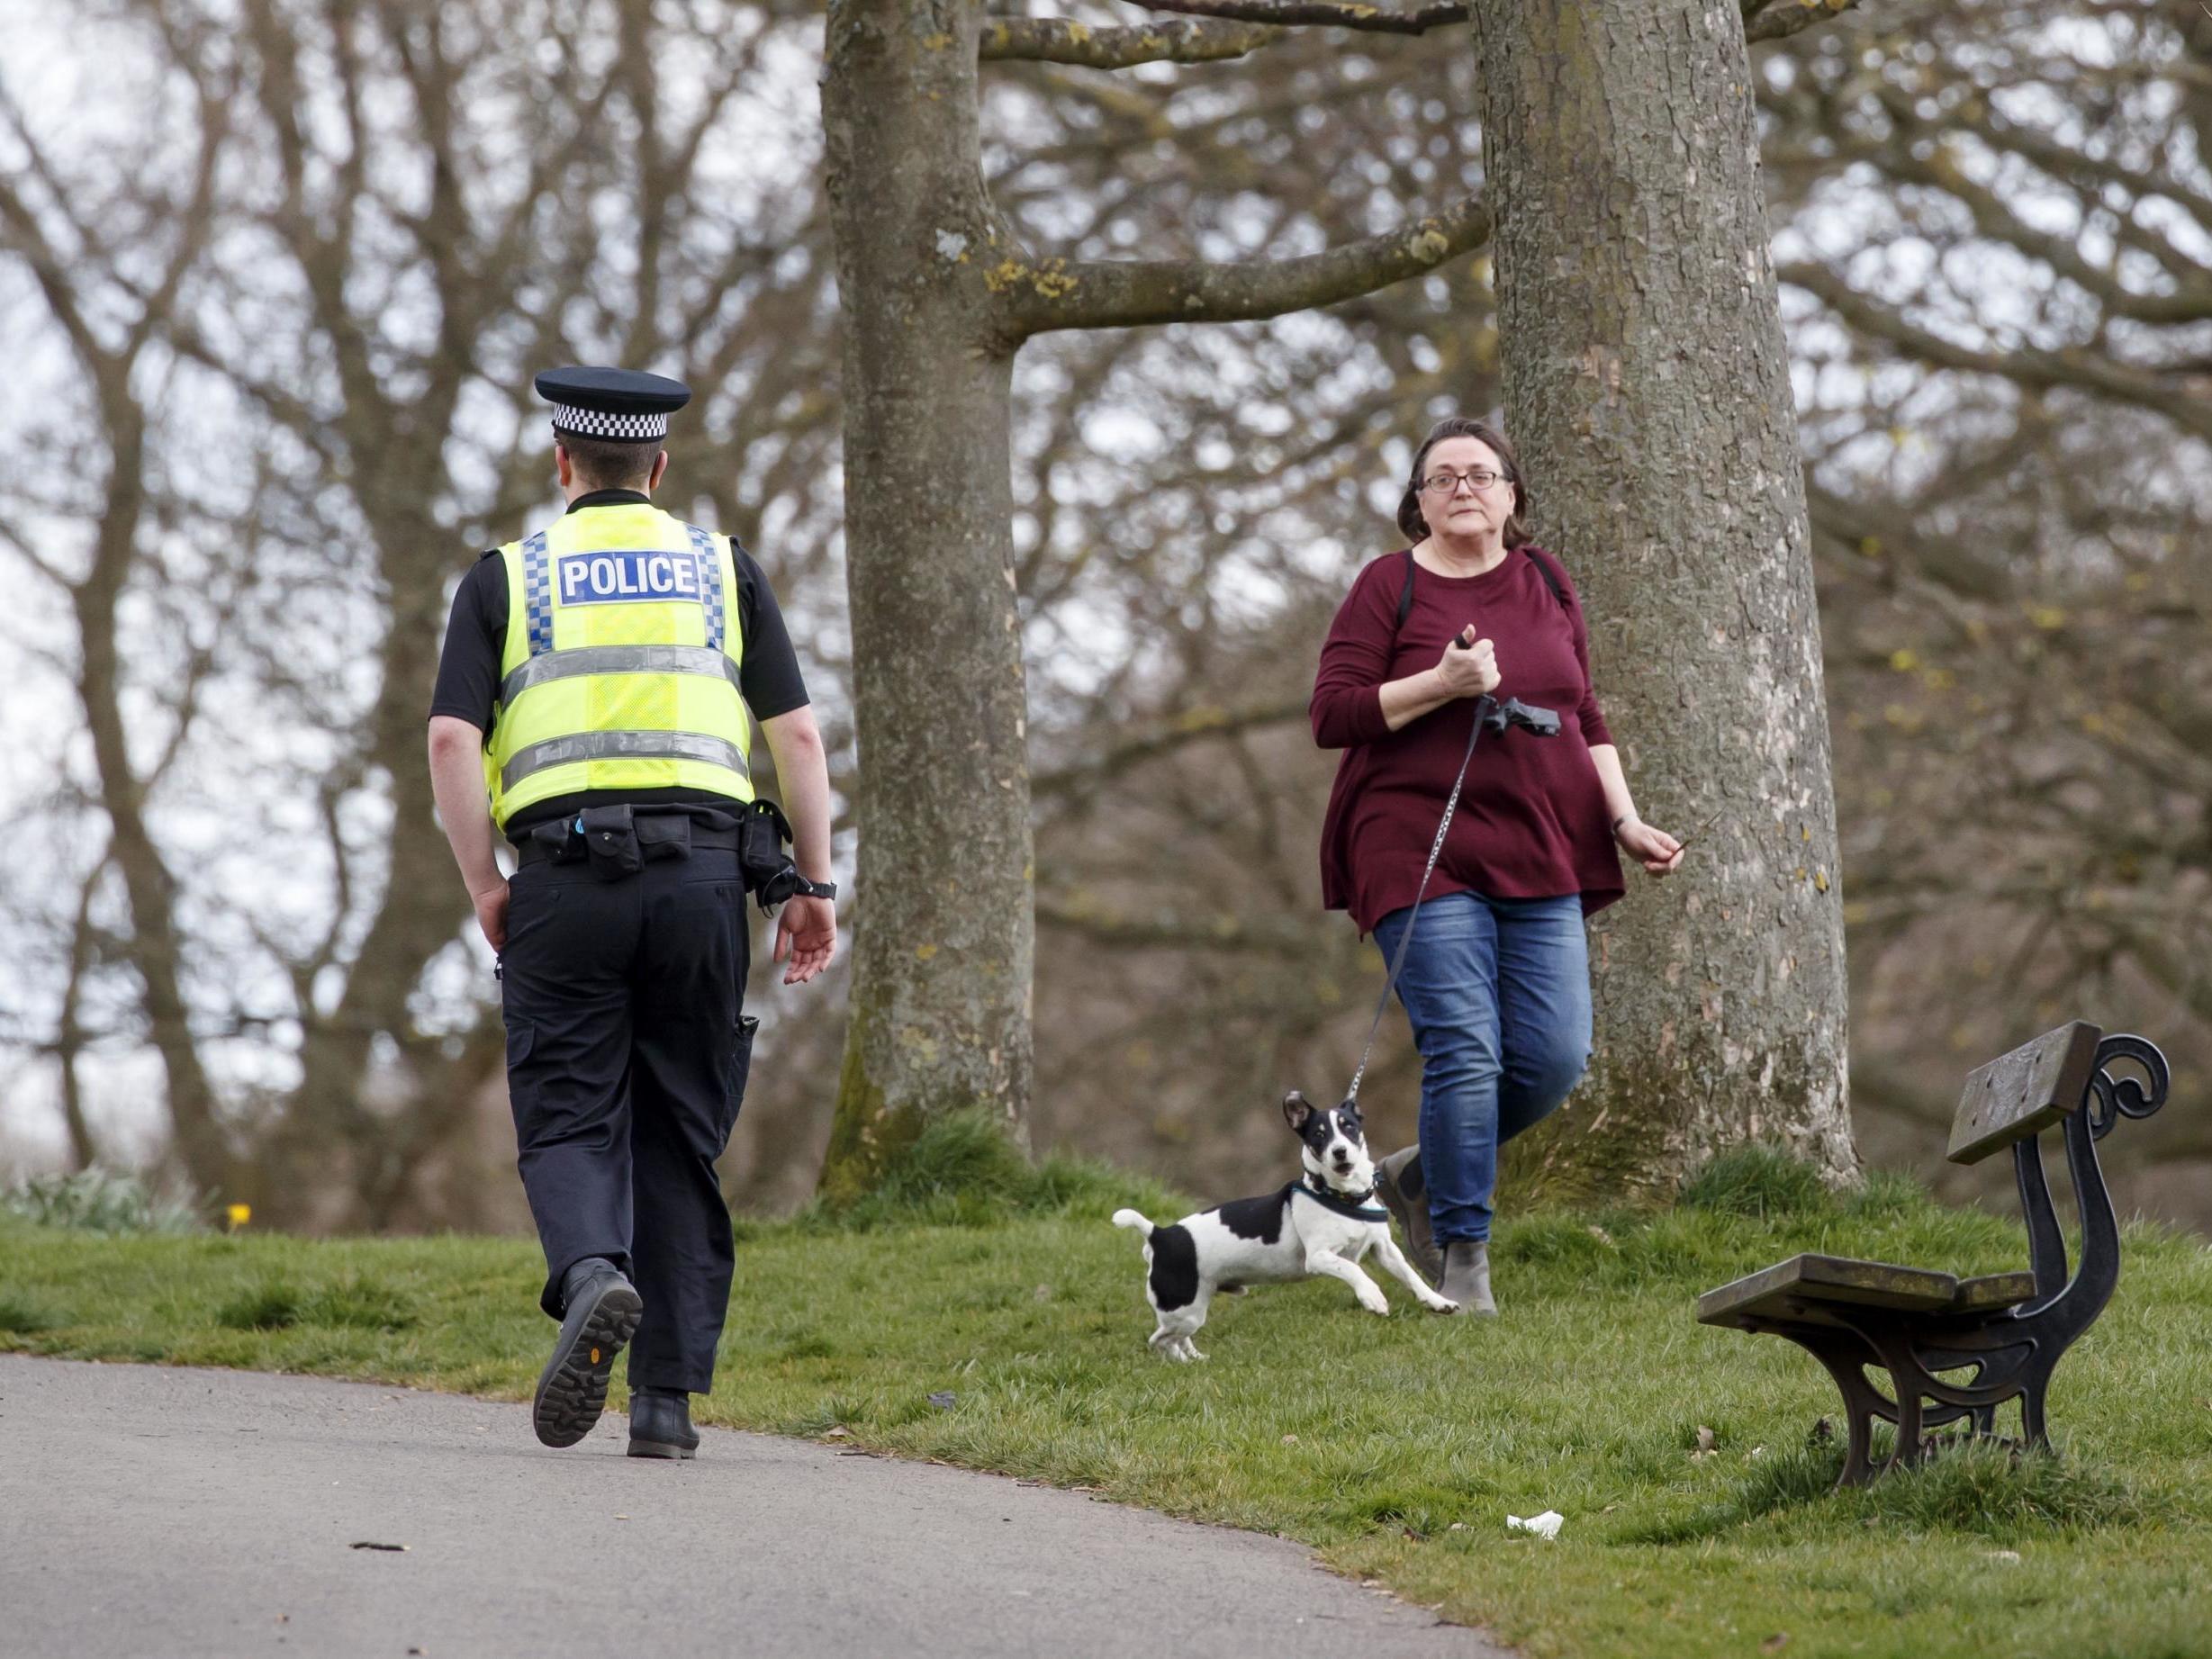 A policeman walks past a woman exercising with dog in Roundhay Park, Leeds